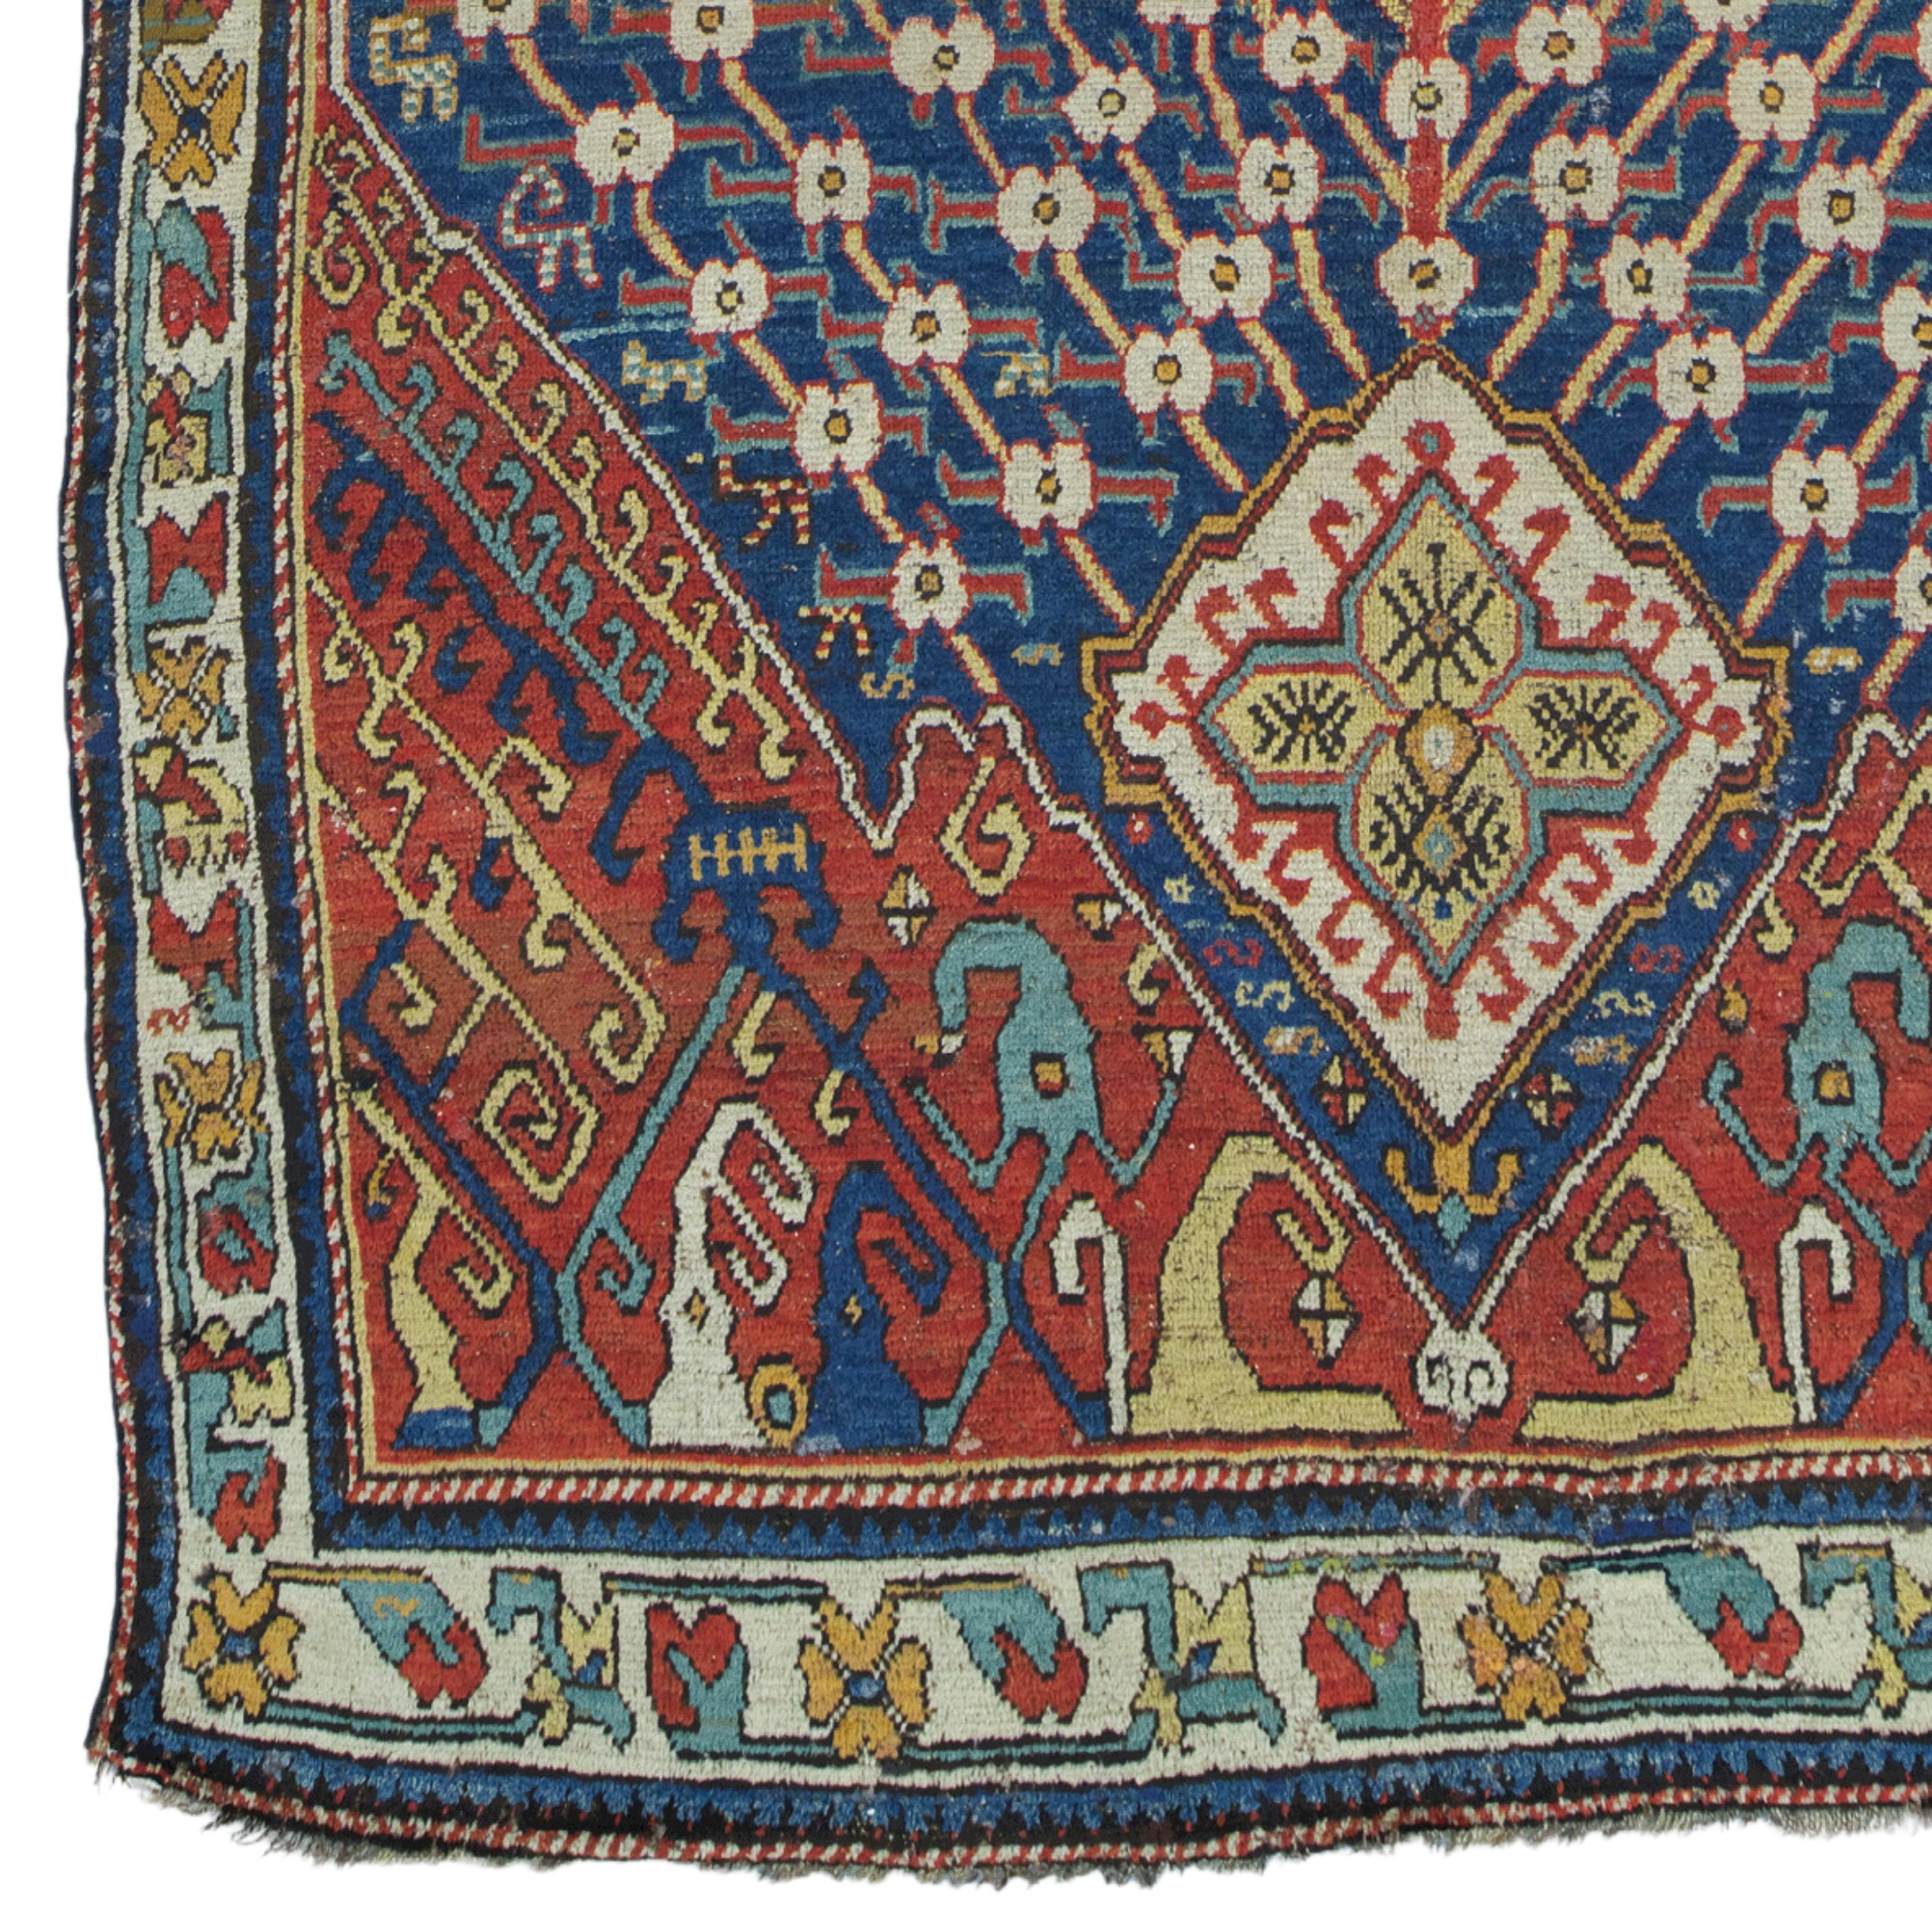 This elegant mid-19th-century Caucasian rug has a rich and intricate design, featuring geometric patterns and stylized floral motifs surrounded by a central medallion in shades of gold, red, and blue. The border decorations are detailed with smaller